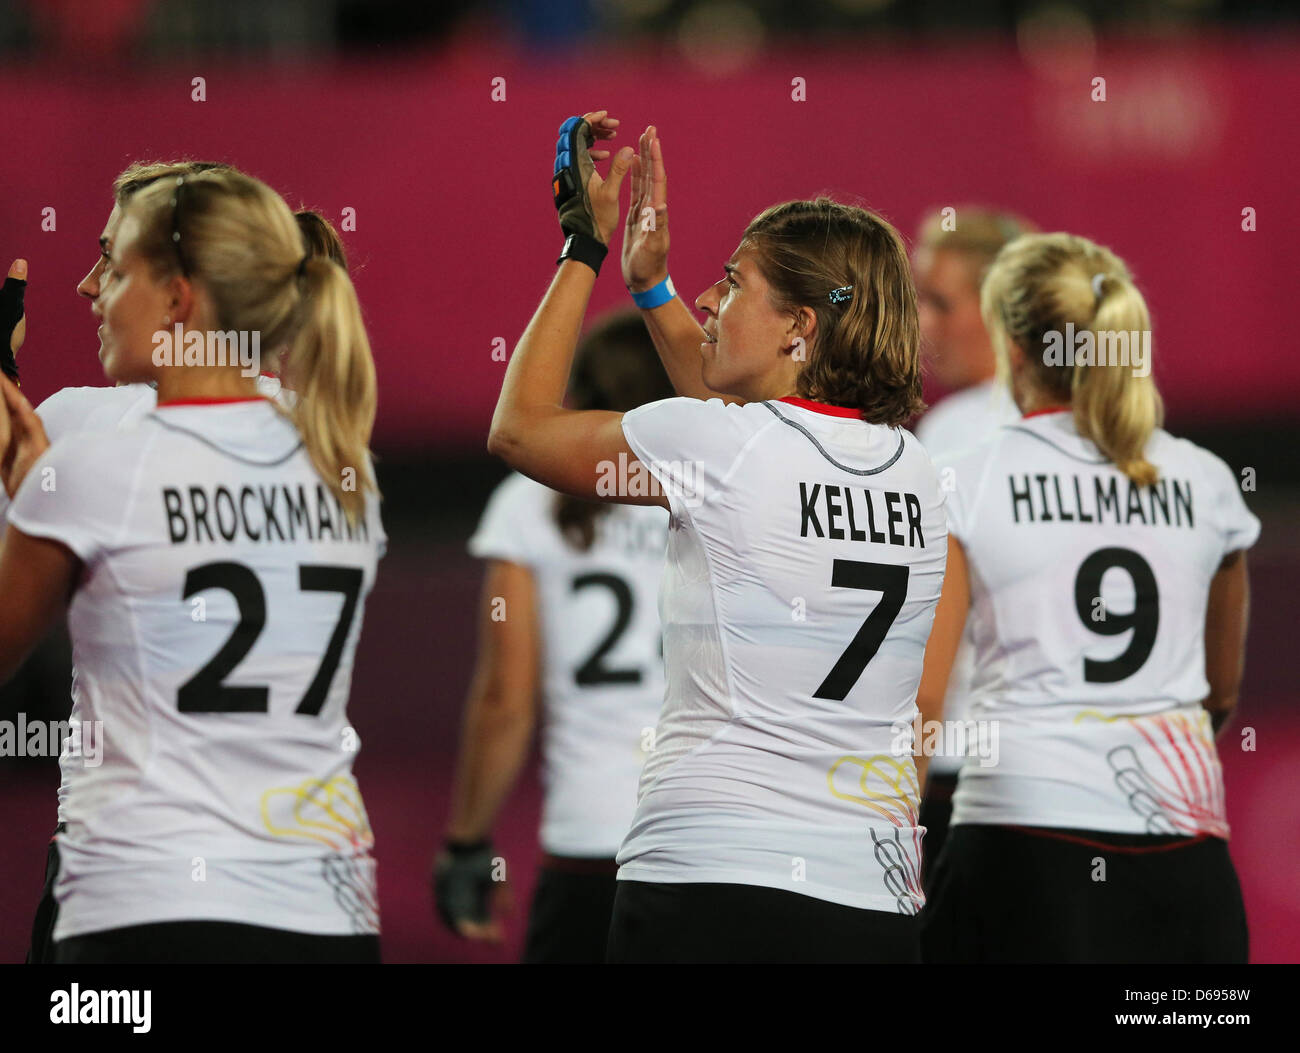 The Germany team (L-R) Anke Brockmann, Natascha Keller and Kristina Hillmann celebrate at the end of the game against the United States during women's field hockey at Olympic Park Riverbank Arena for the London 2012 Olympic Games, London, Britain, 29 July 2012. Photo: Christian Charisius dpa  +++(c) dpa - Bildfunk+++ Stock Photo